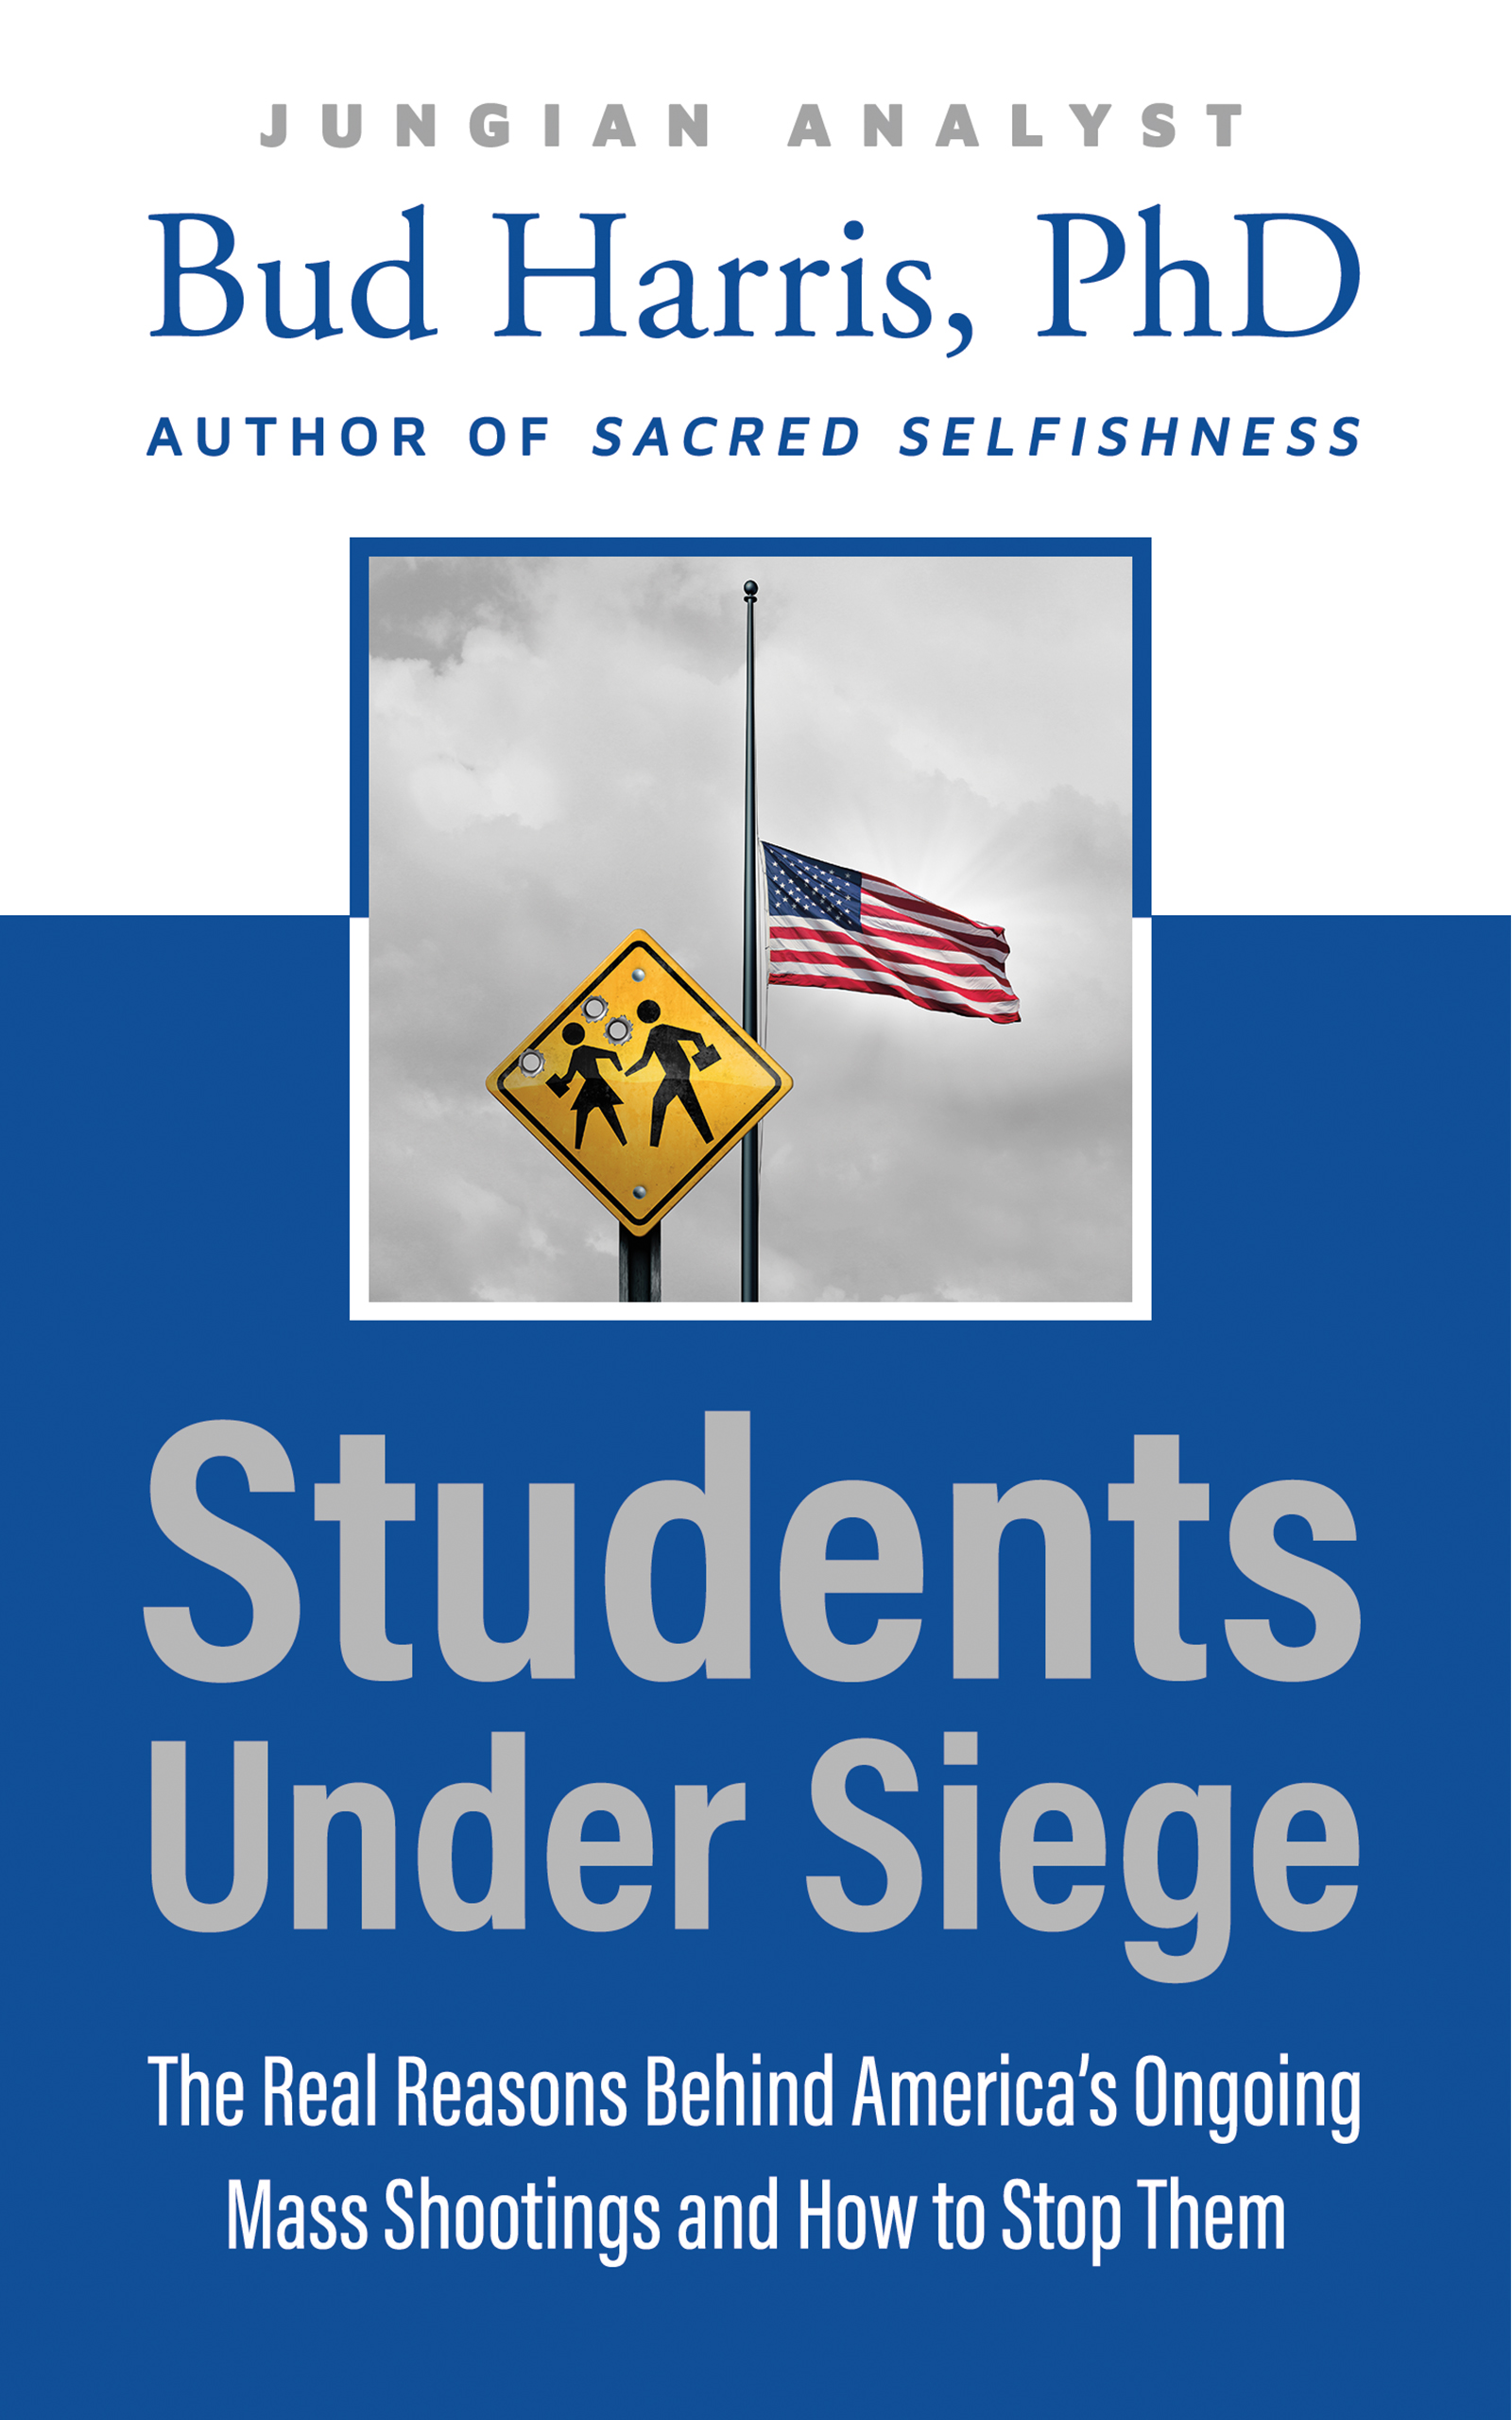 Students Under Siege: The Real Reasons Behind America's Ongoing Mass Shootings and How to Stop Them